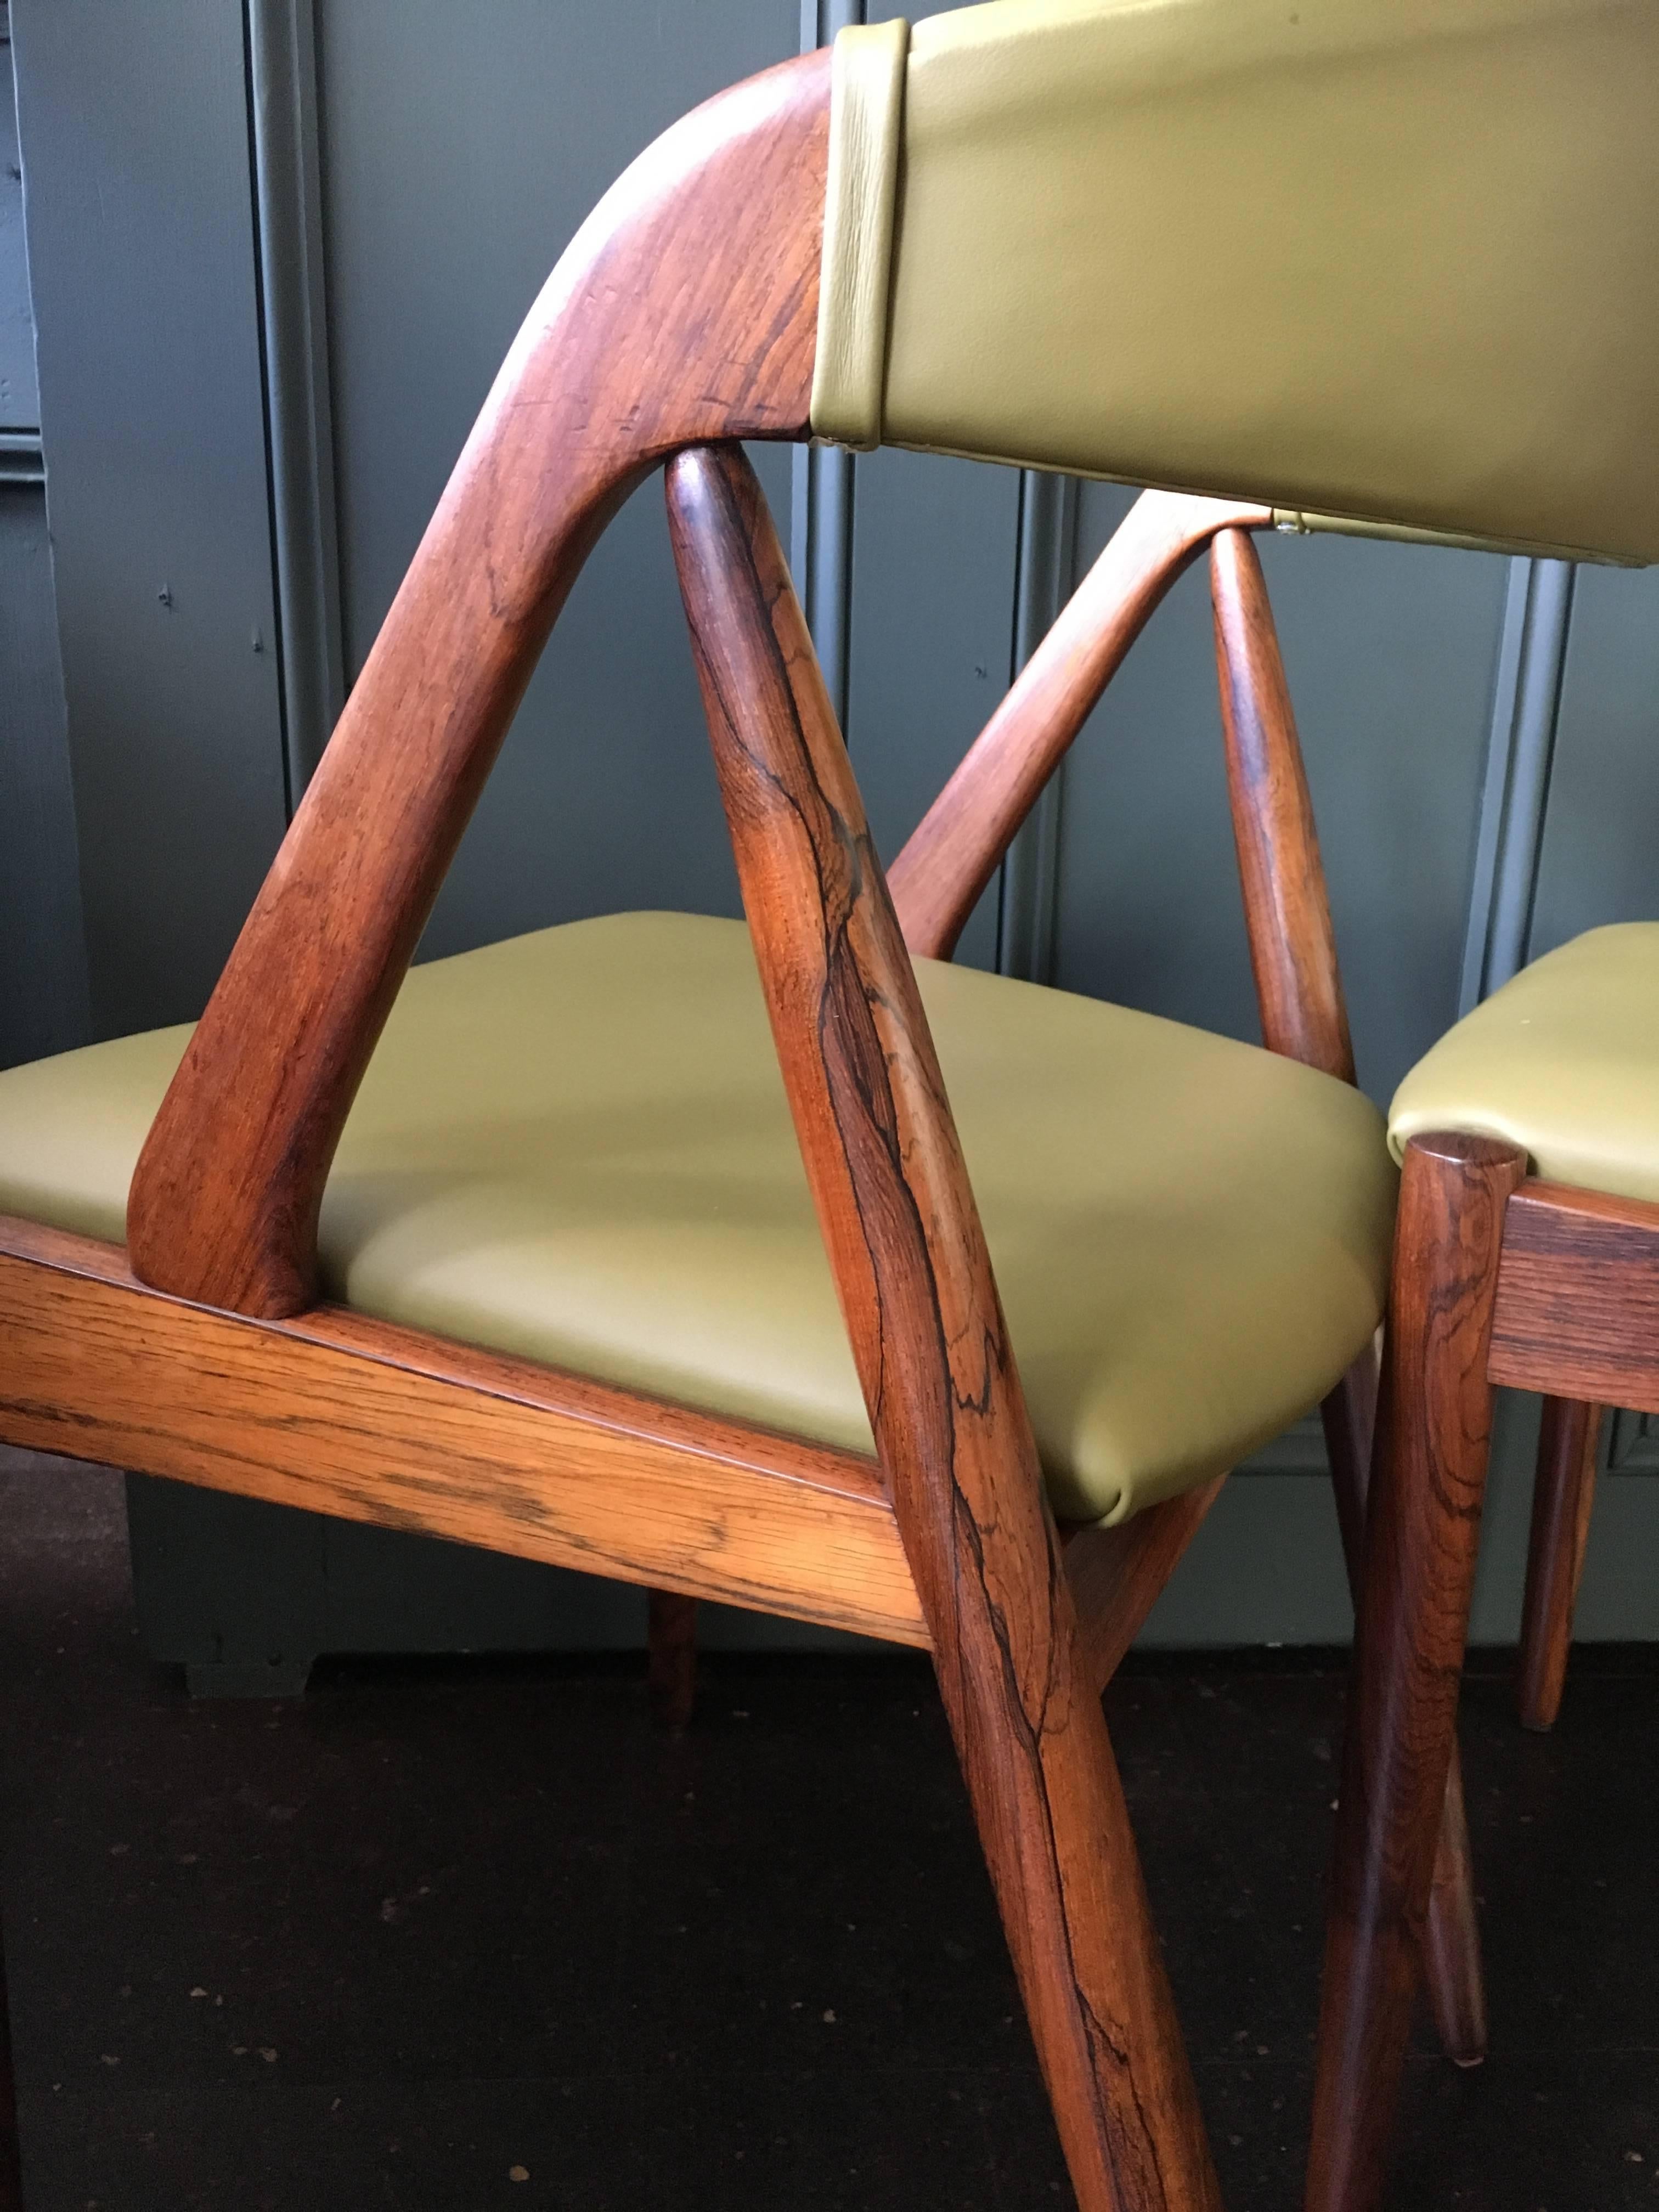 Set of six fully re-upholstered classic Kai Kristiansen model 31 dining chairs, Denmark, 1960.
Superb new Italian olive leather upholstery to contrast the beautifully grained rosewood frames.
We currently have more of these in stock if larger